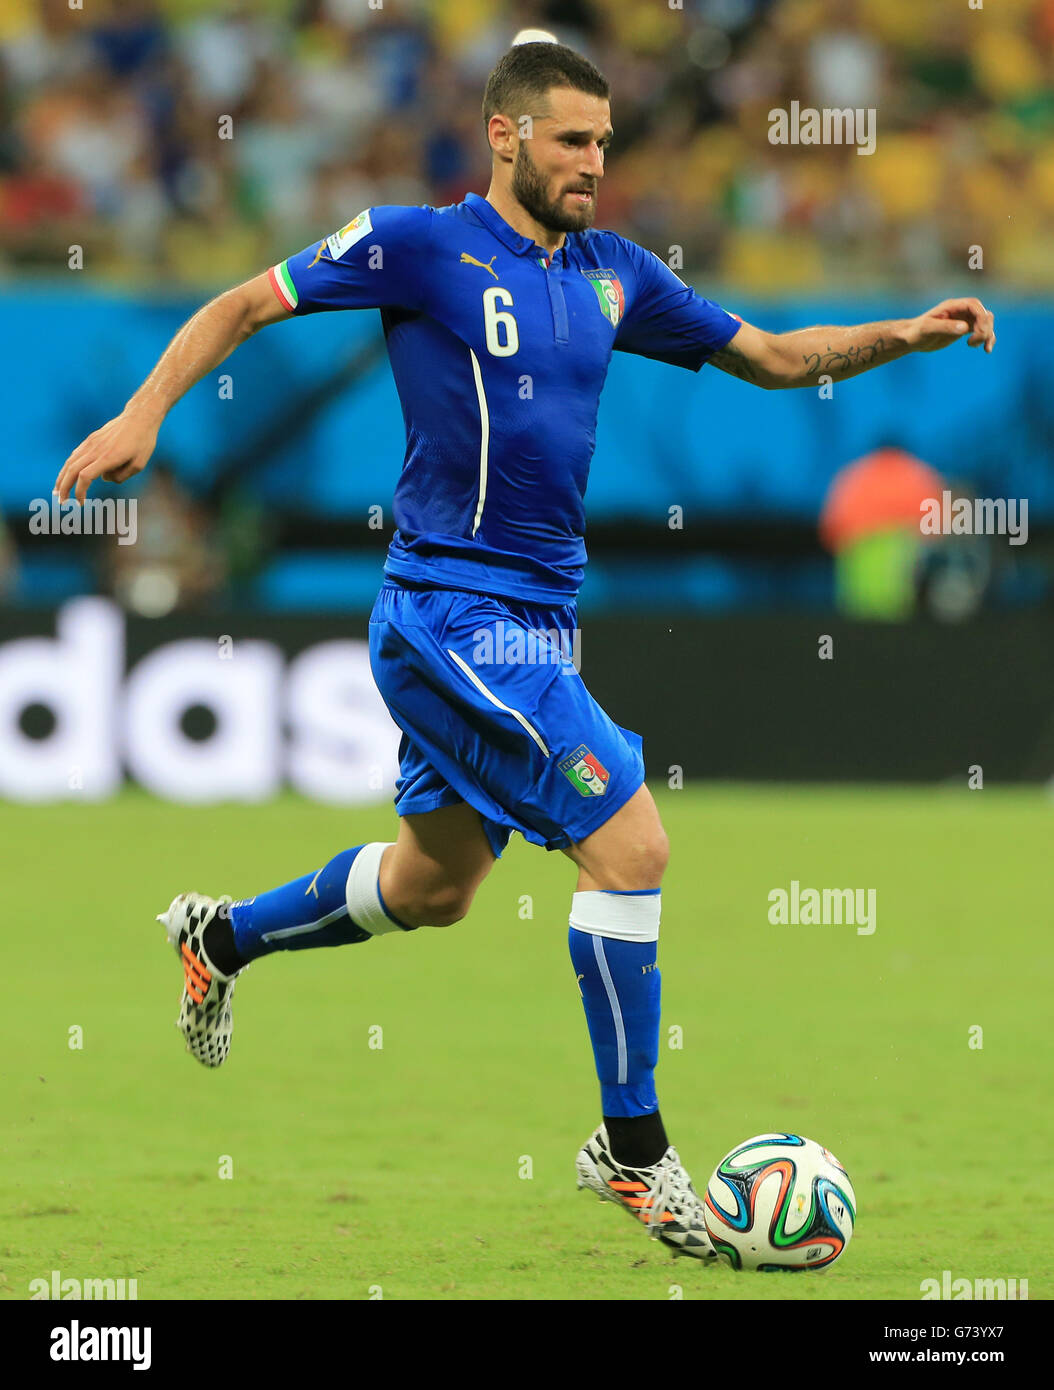 Italy's Antonio Candreva during the FIFA World Cup, Group D match at the Arena da Amazonia, Manaus, Brazil. PRESS ASSOCIATION Photo. Picture date: Saturday June 14, 2014. See PA story SOCCER England. Photo credit should read: Nick Potts/PA Wire. Editorial use only. No commercial use. No use with any unofficial 3rd party logos. No manipulation of images. No video emulation Stock Photo